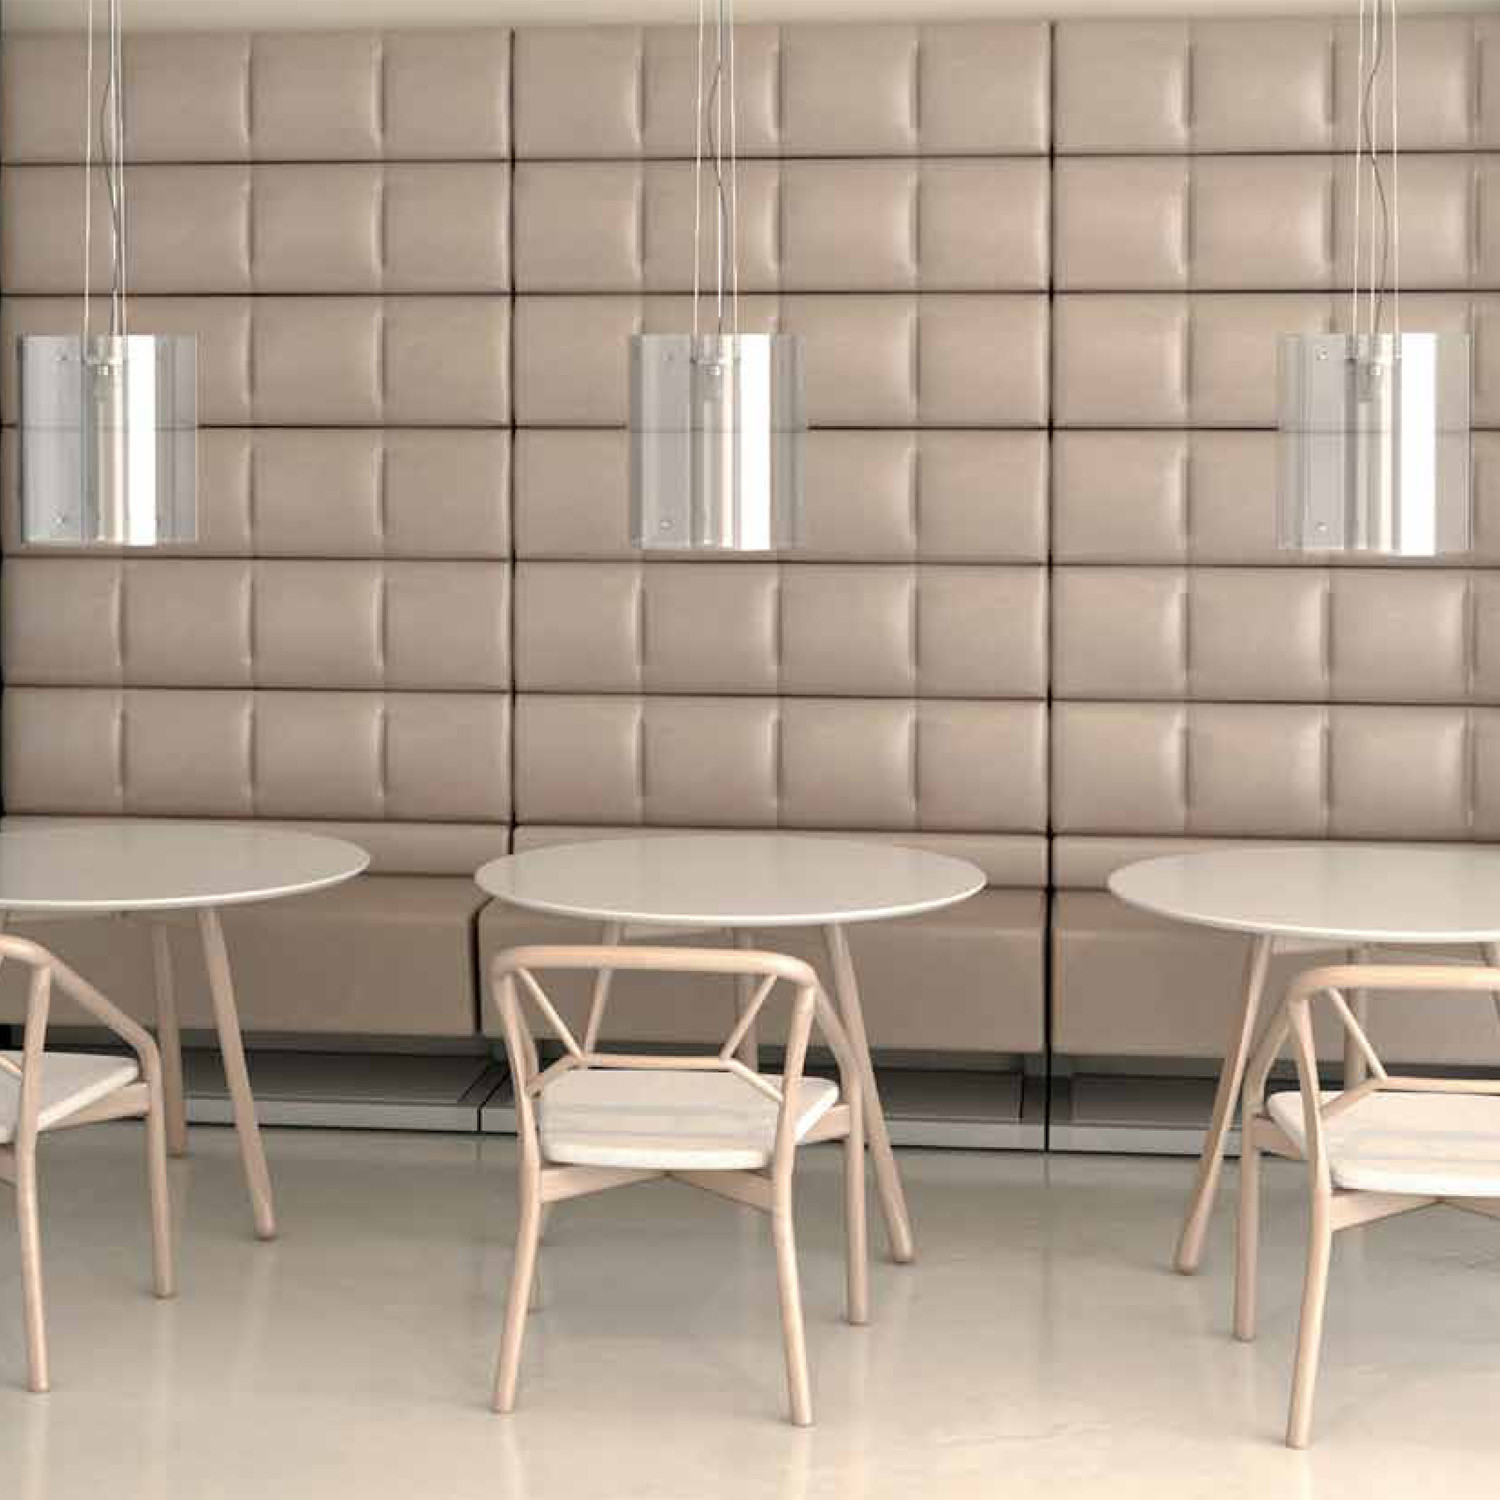 Palate Banquette Bench Dining